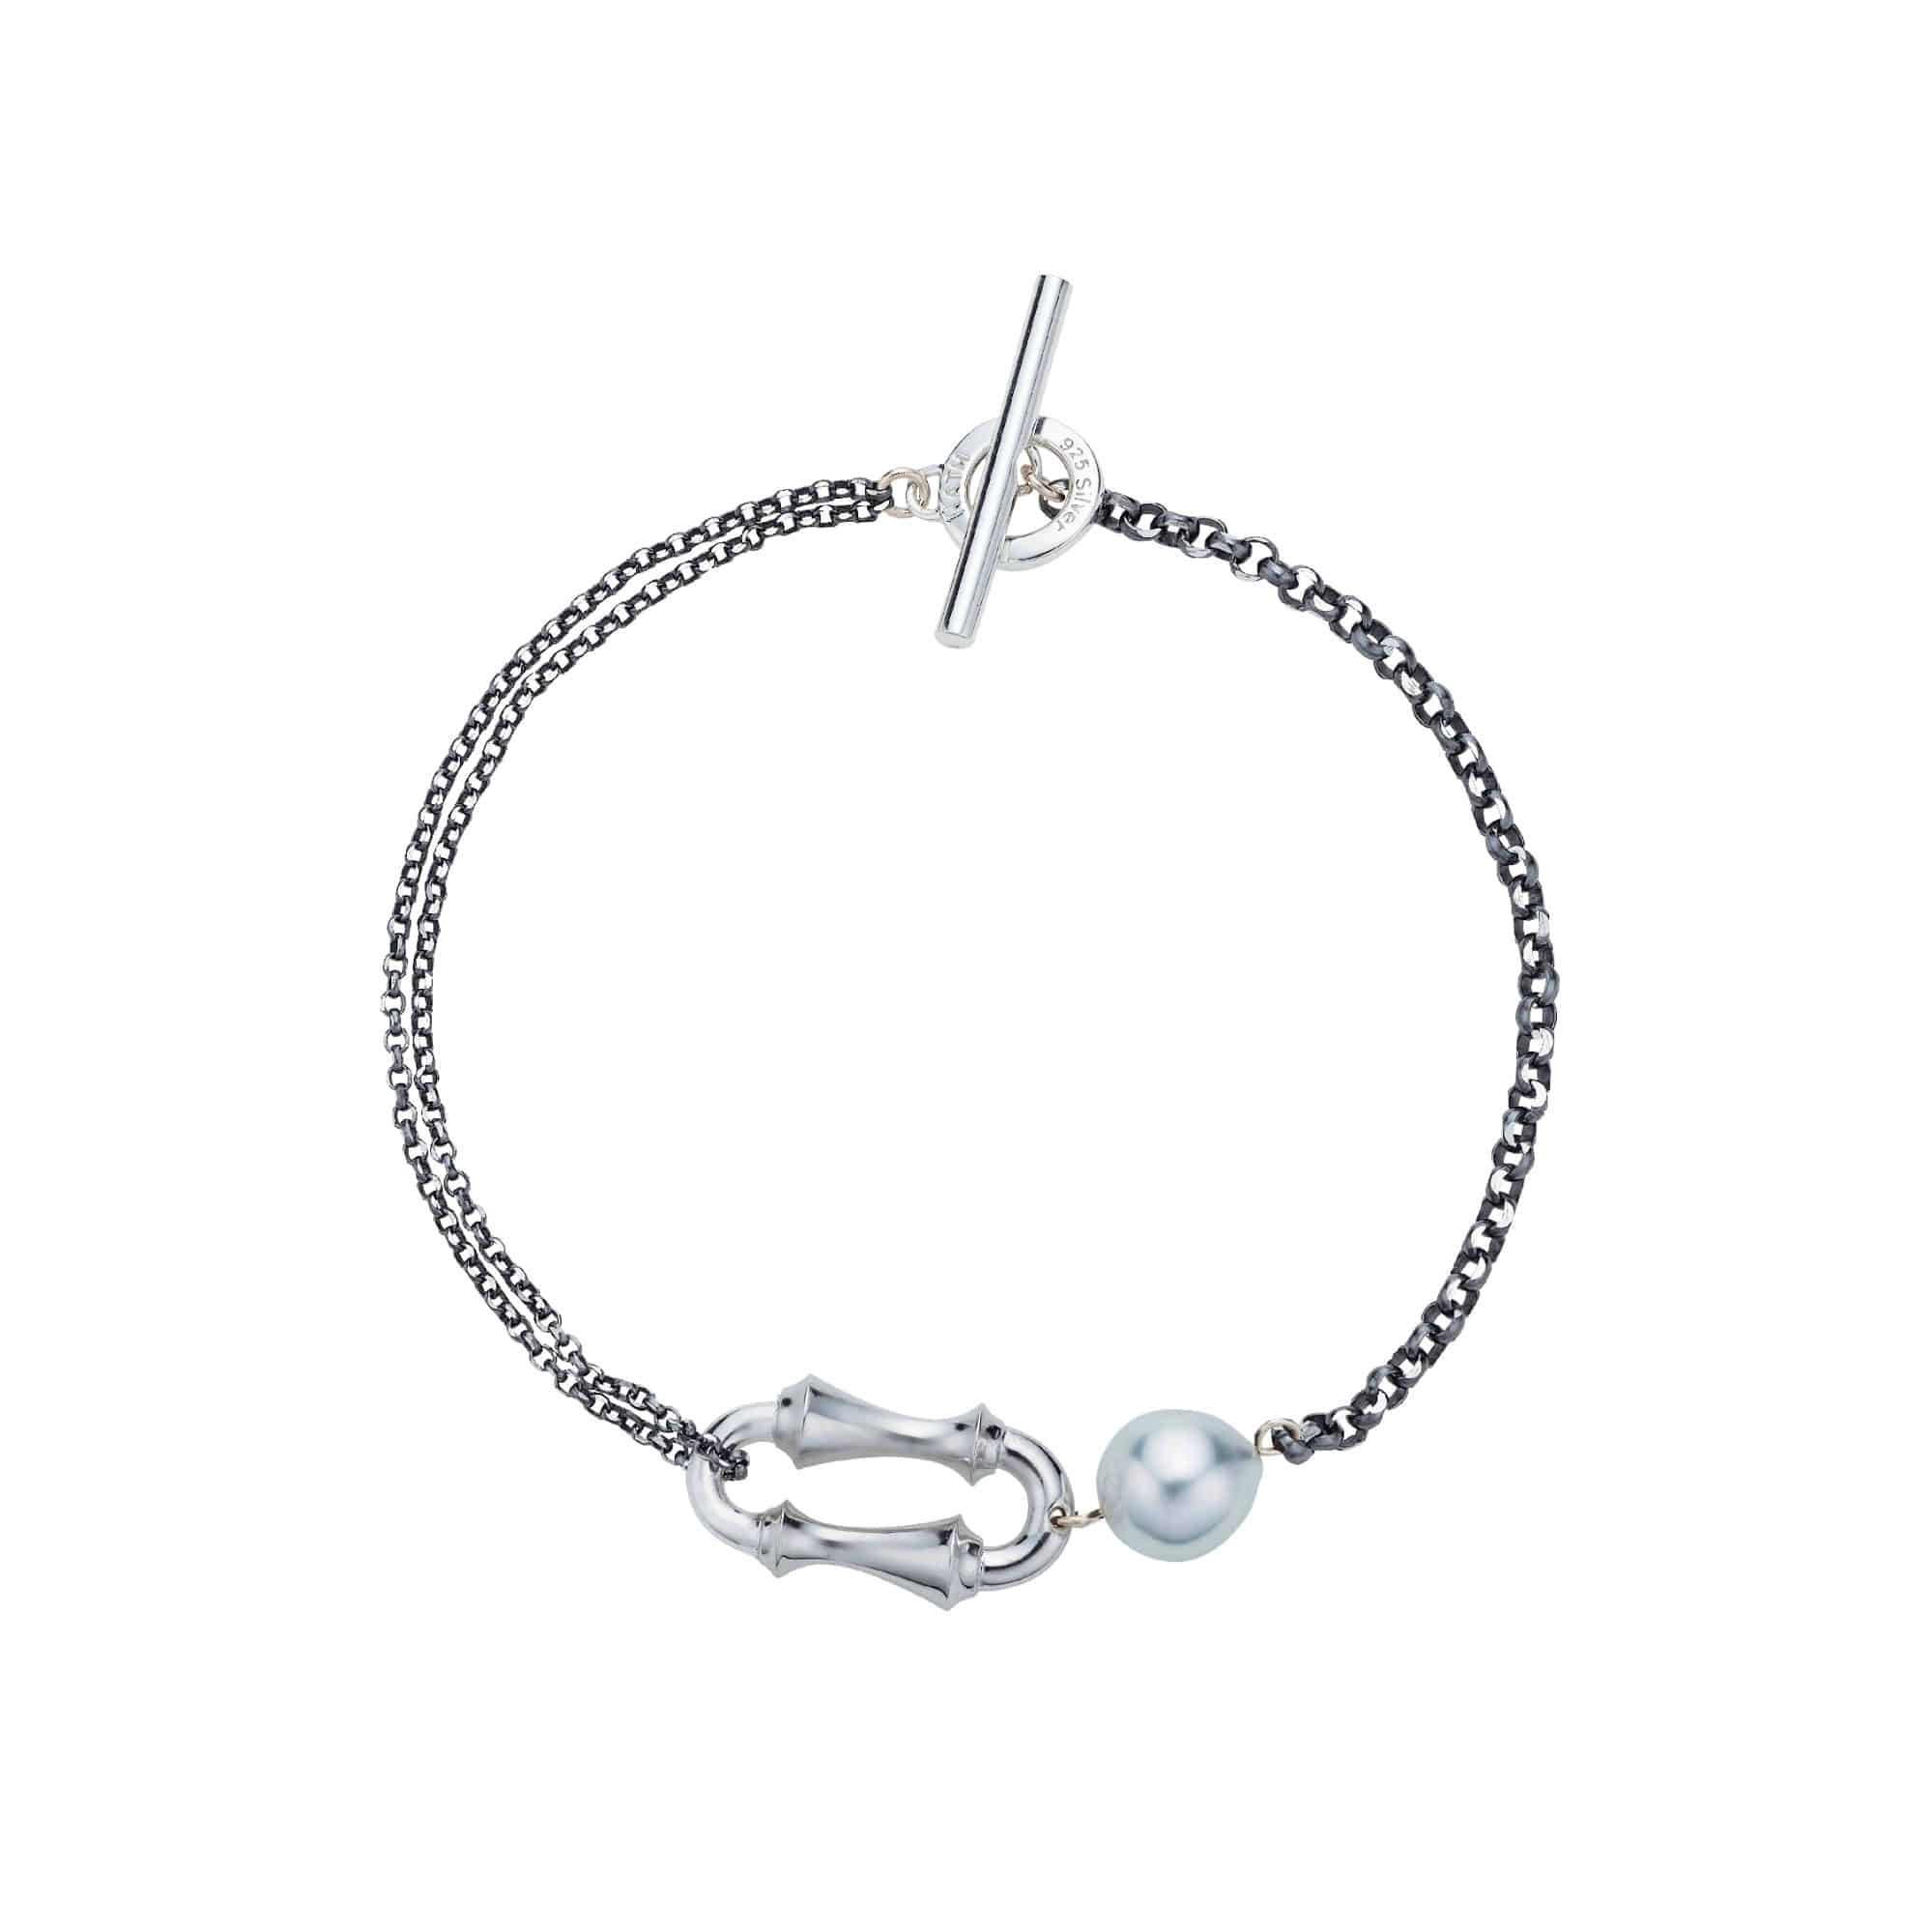 ARC T1 Bracelet in Sterling Silver with an Akoya Pearl (Oxidized Silver Chain)